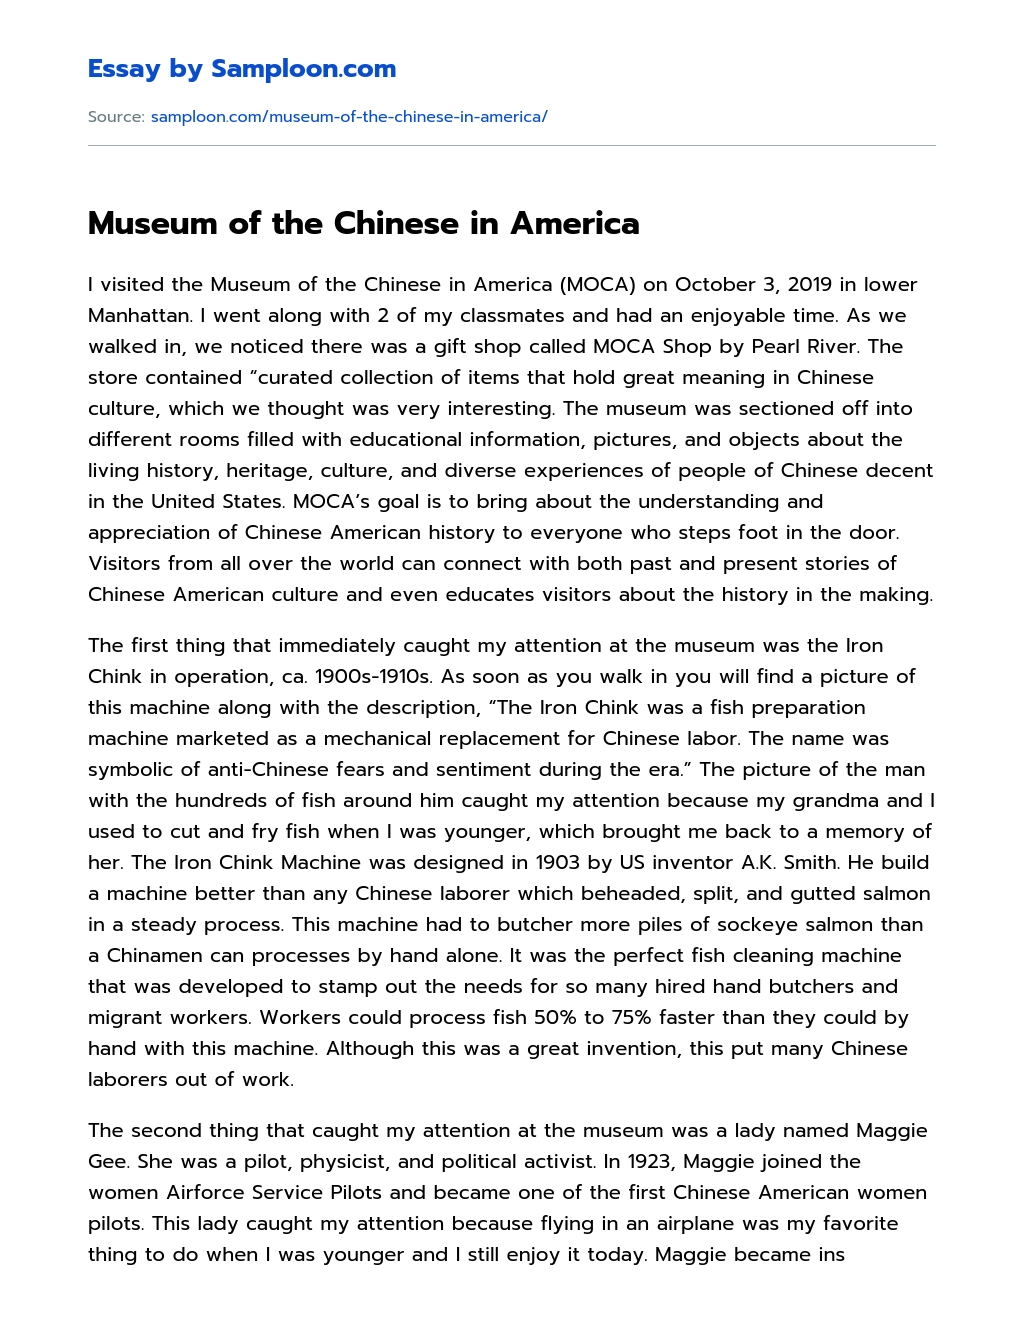 Museum of the Chinese in America essay